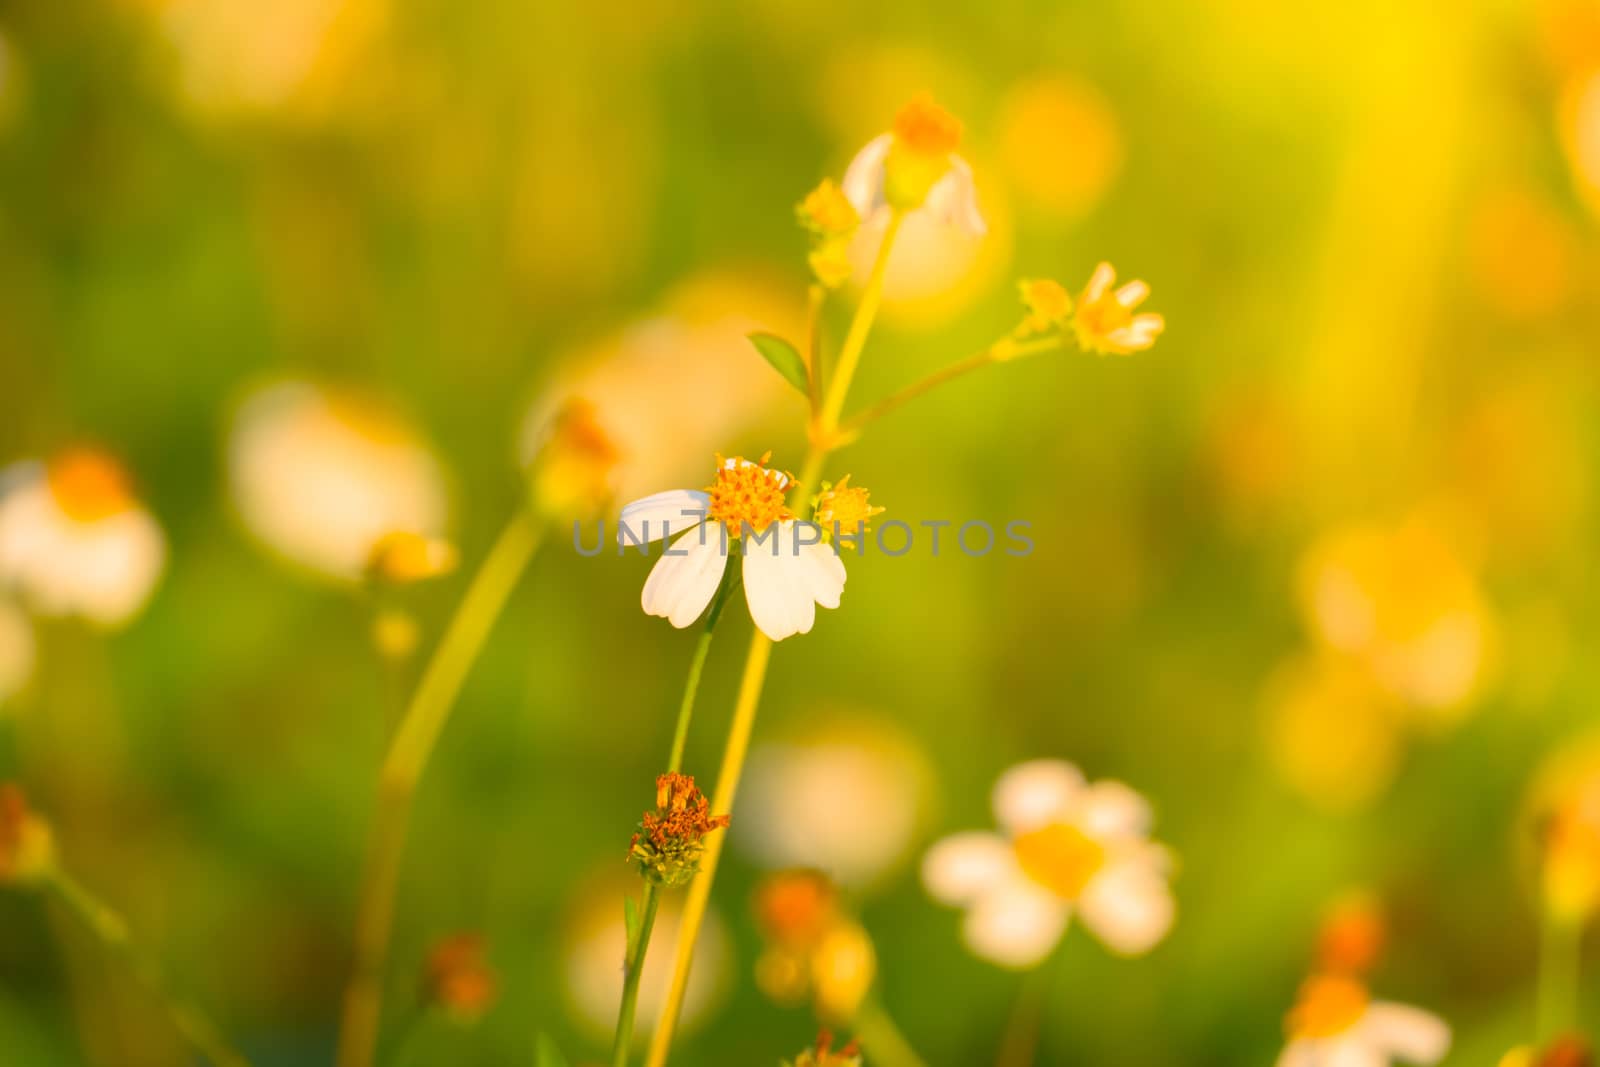 Grass flower causes the allergic symptoms by teerawit